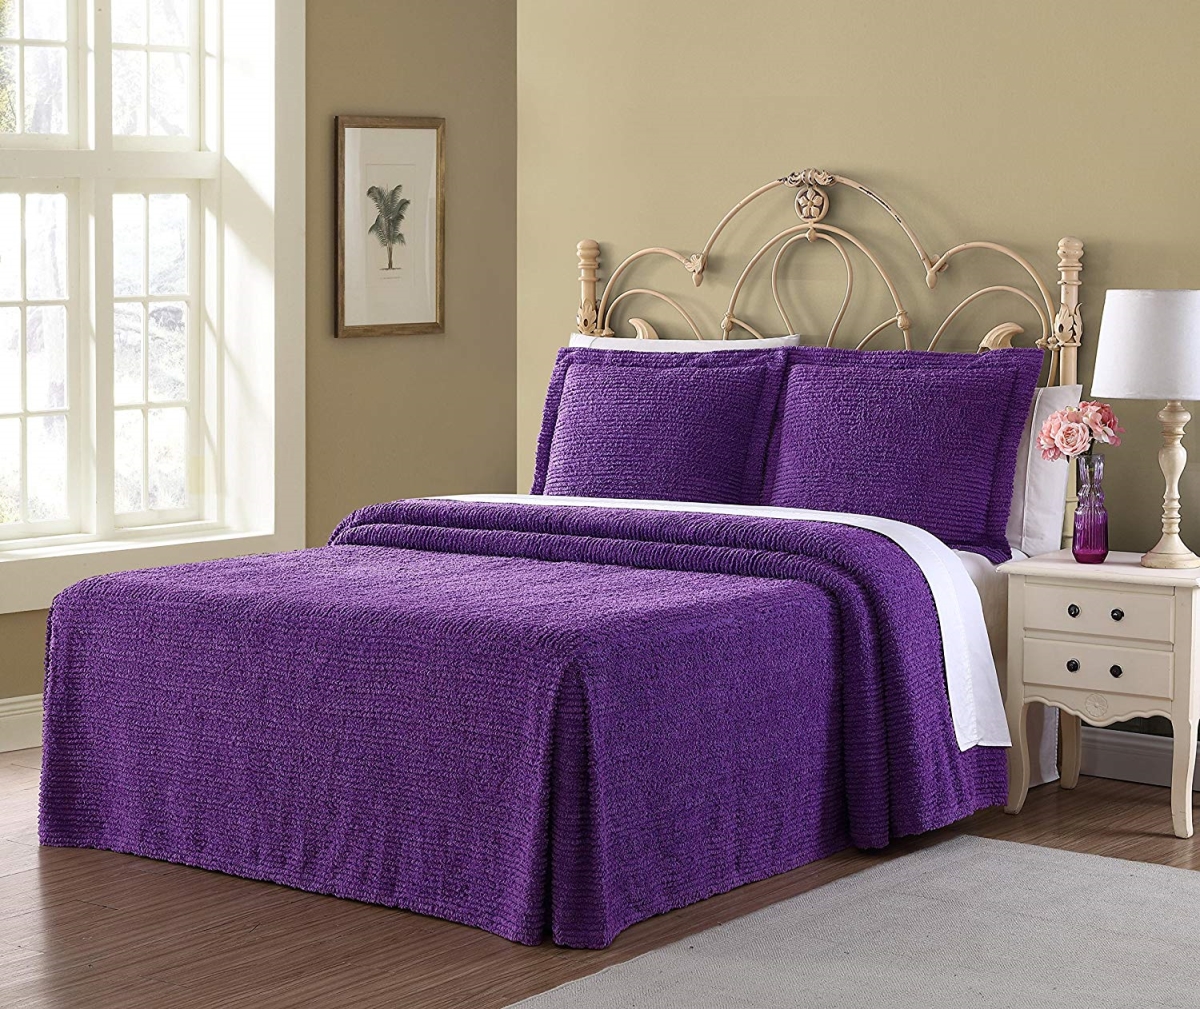 20711802bsp-lil Richland Chenille Solid Bedspread, Purple - Full Size